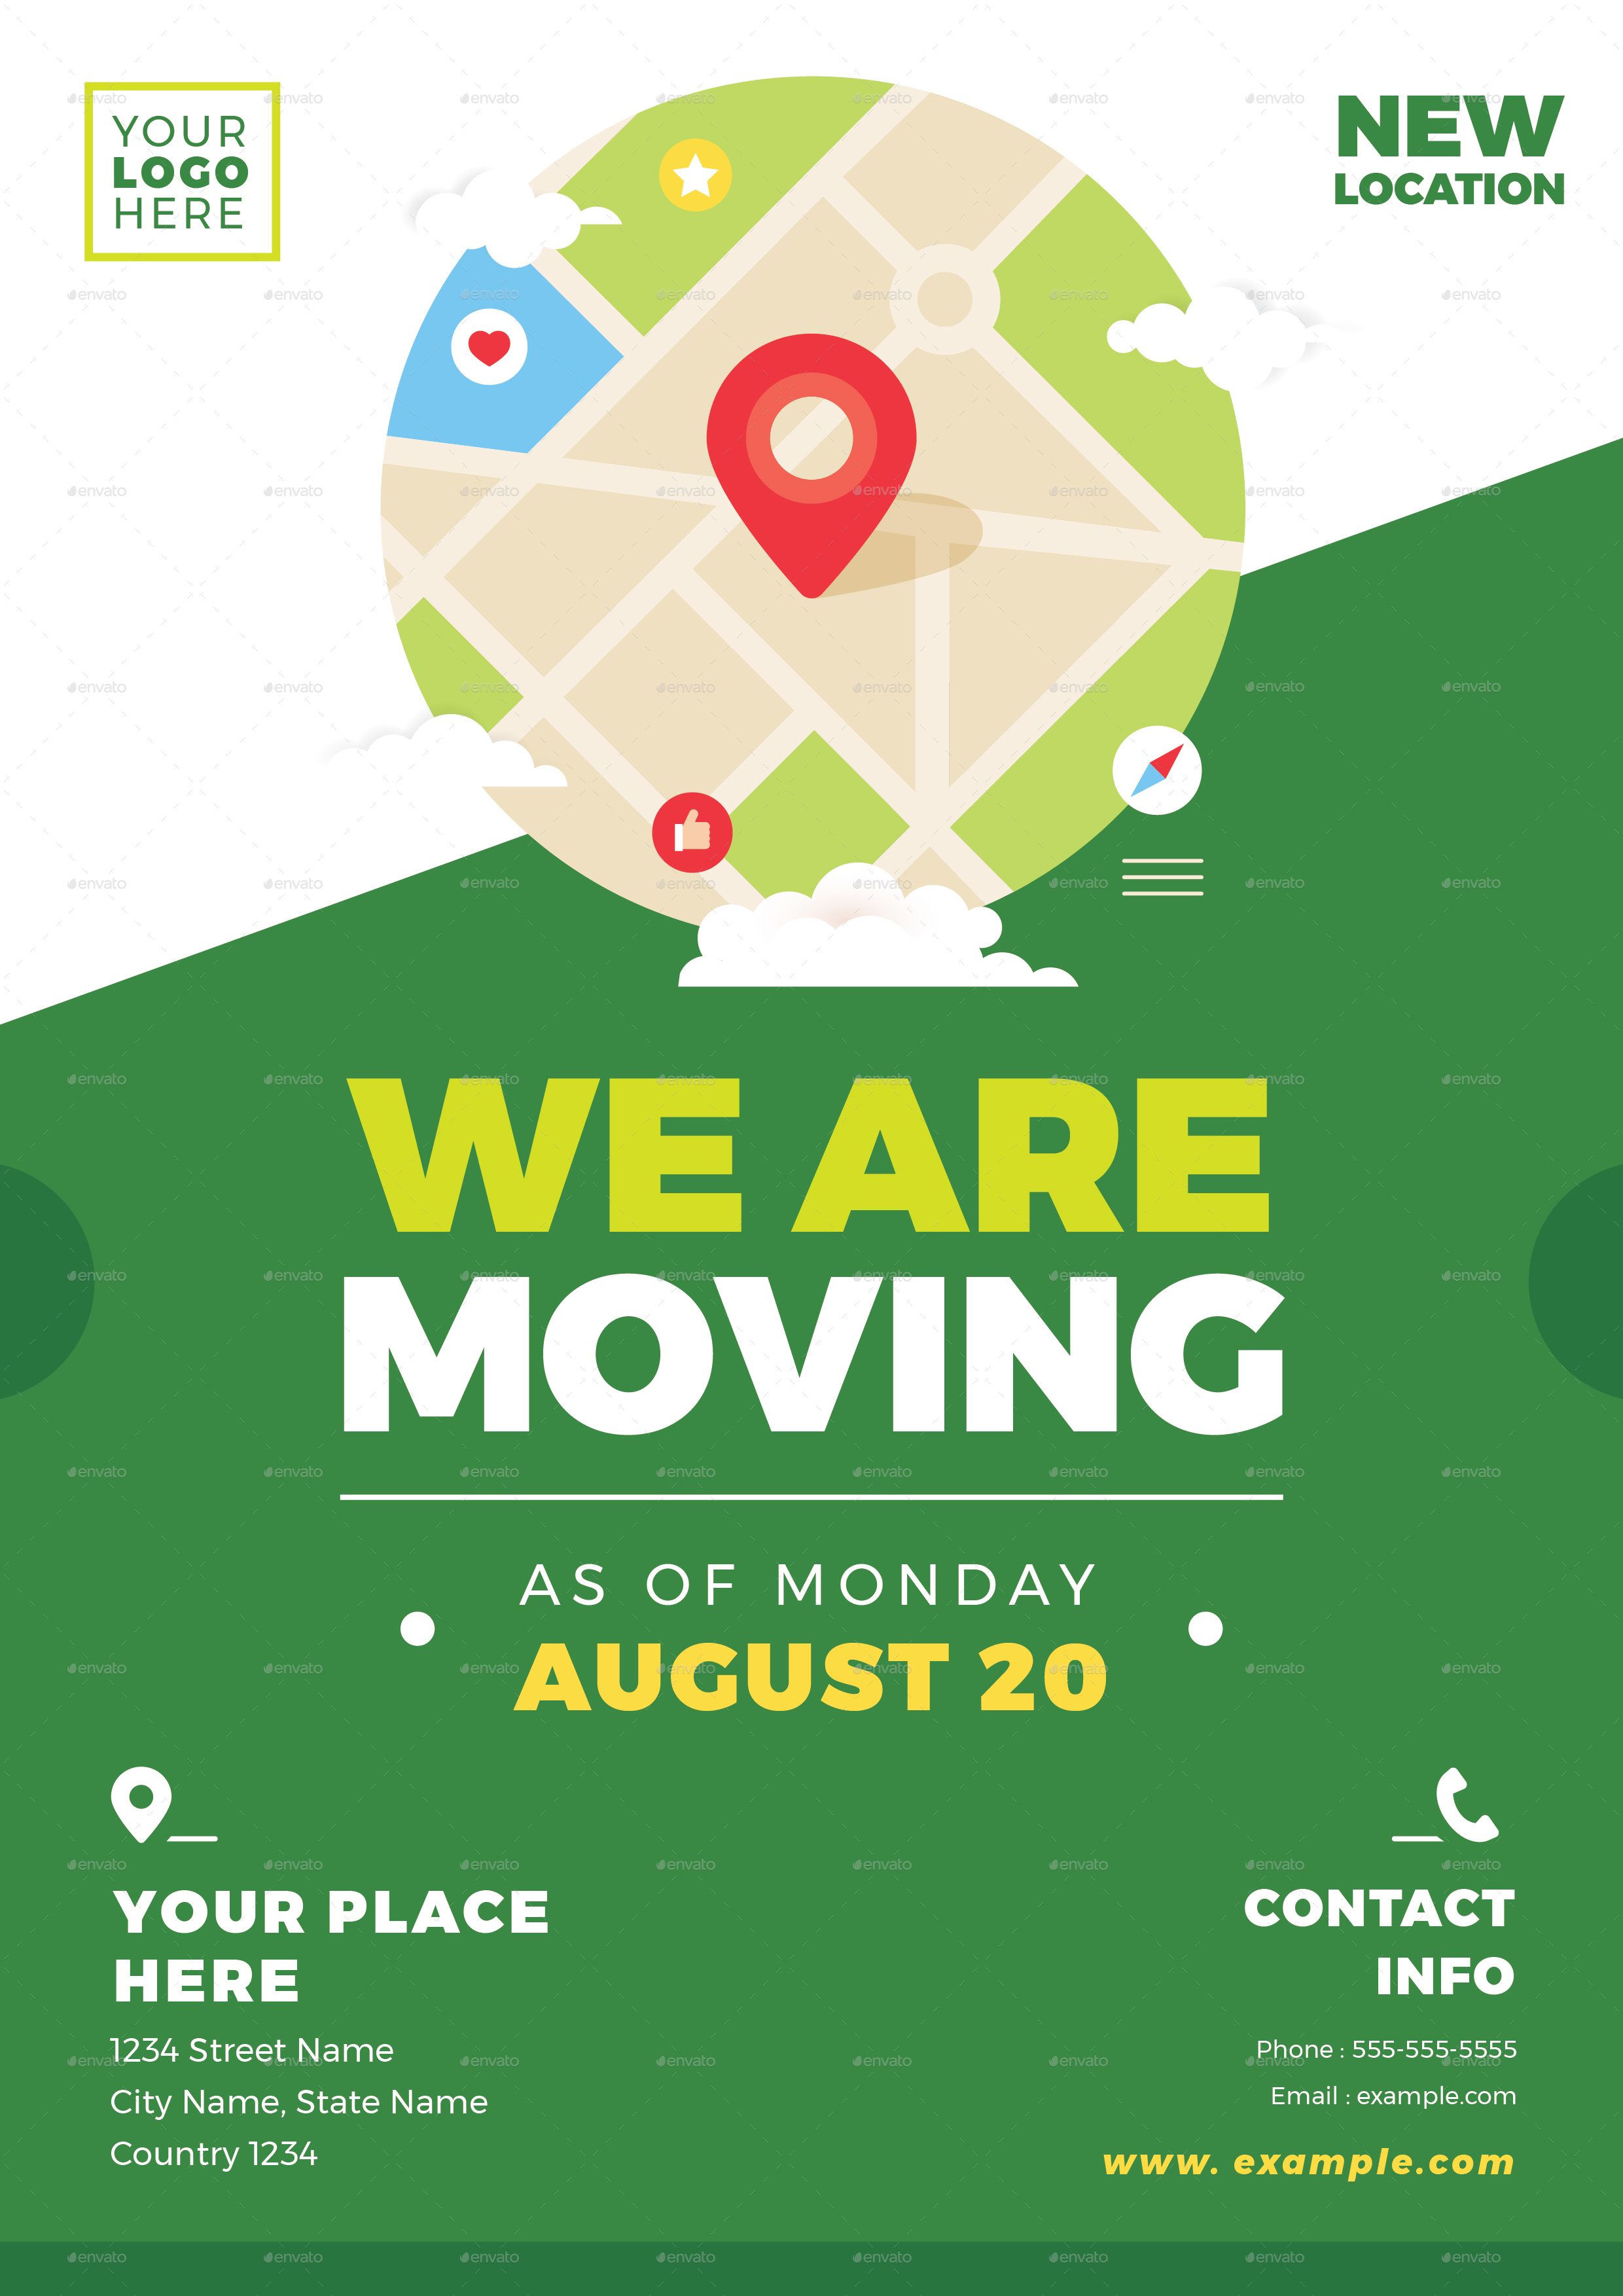 We Are Moving Flyer Templates by GraphicRiver